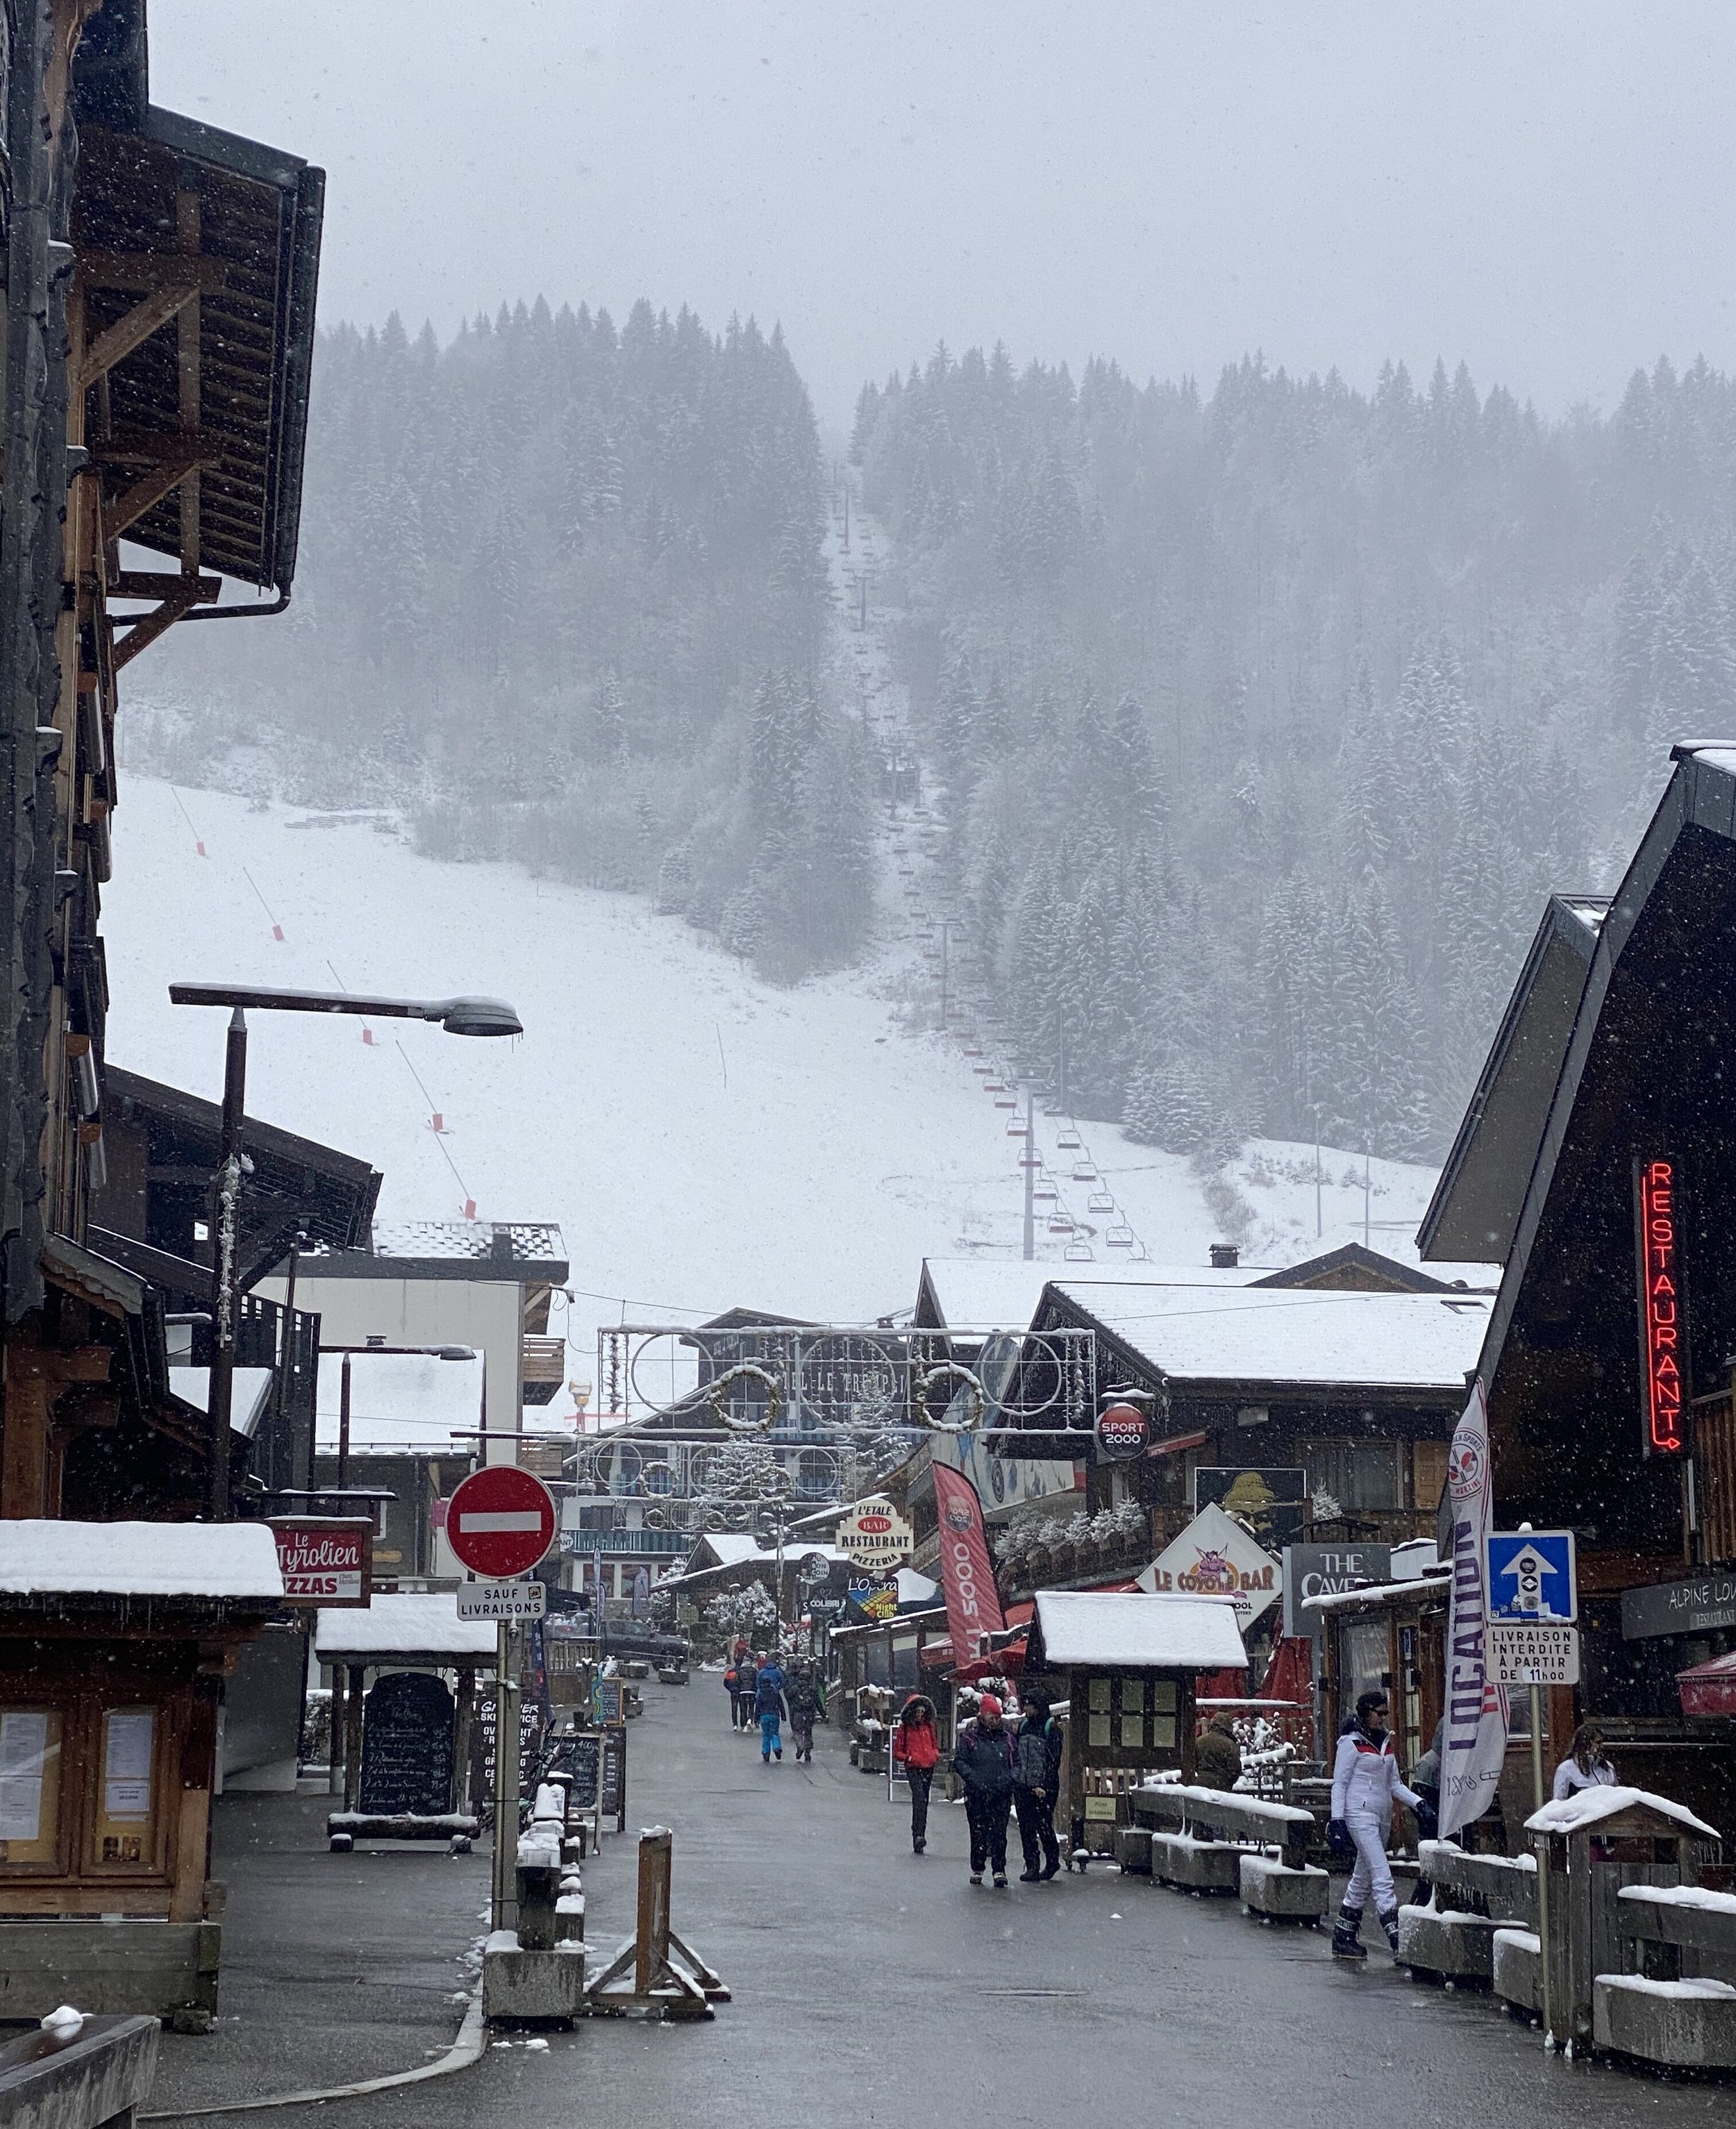 View of a Morzine street in the snow showing the slopes and ski life behind